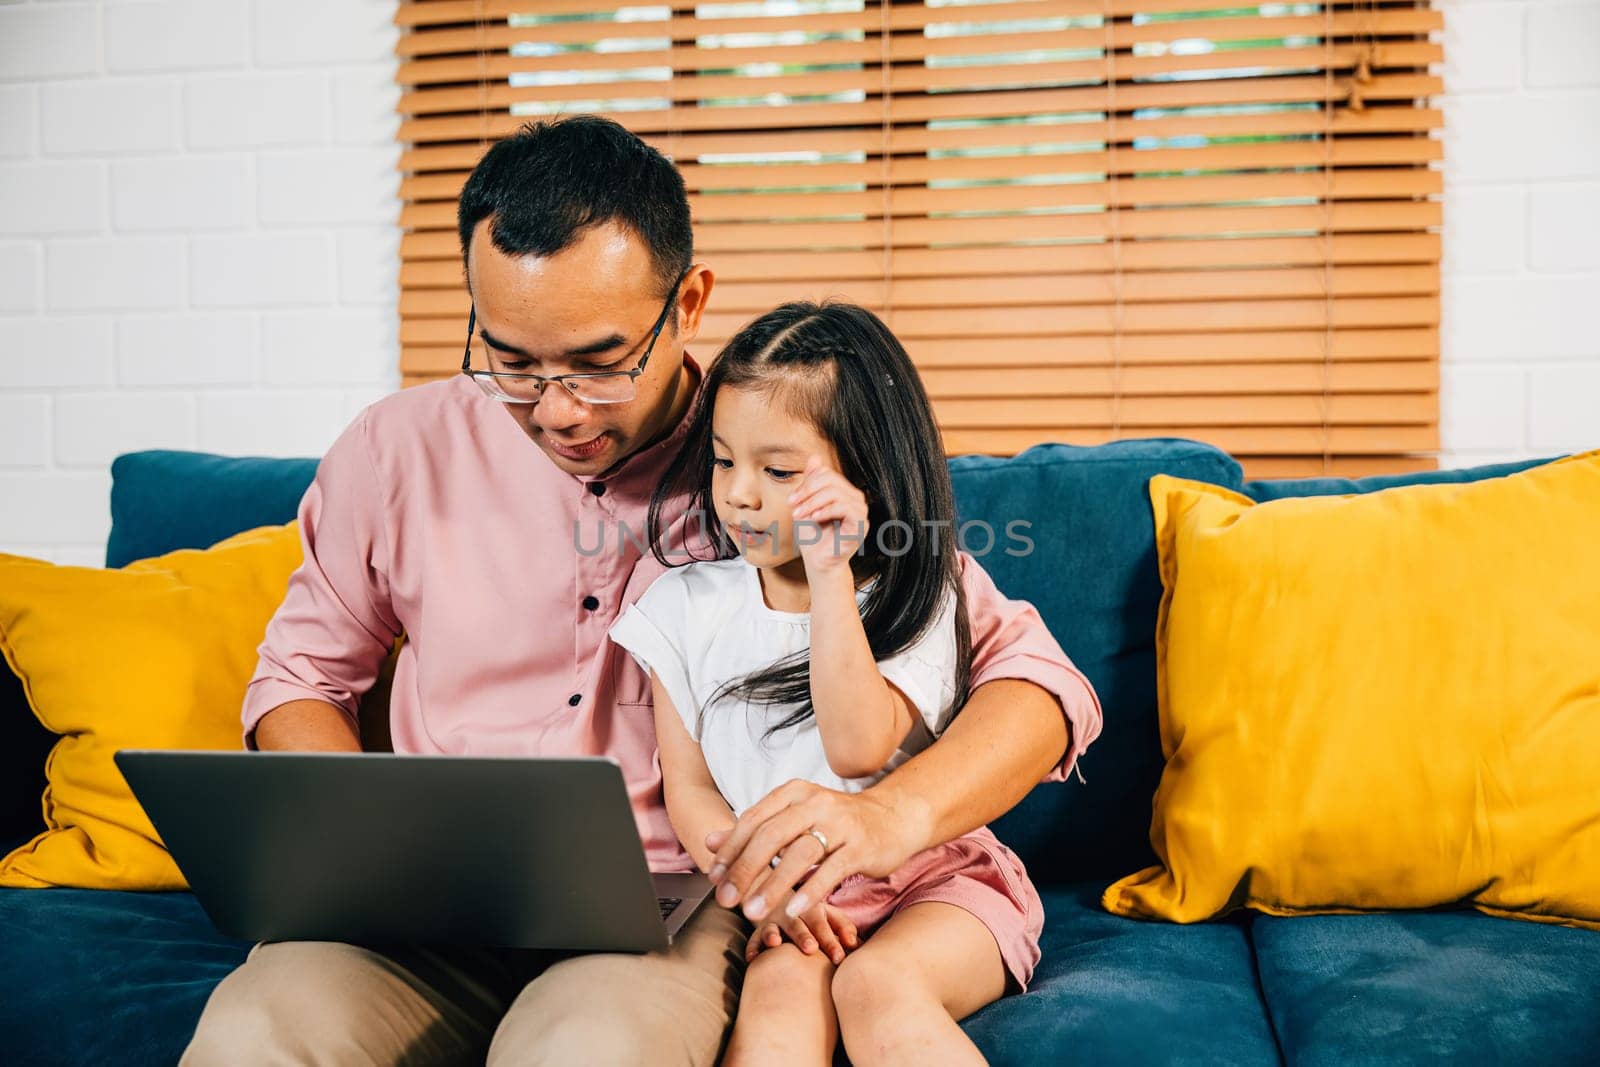 An Asian father finds happiness in his work on a laptop while his daughter enjoys e-learning on a computer in their modern living room. Their togetherness and smiles create a special family moment.